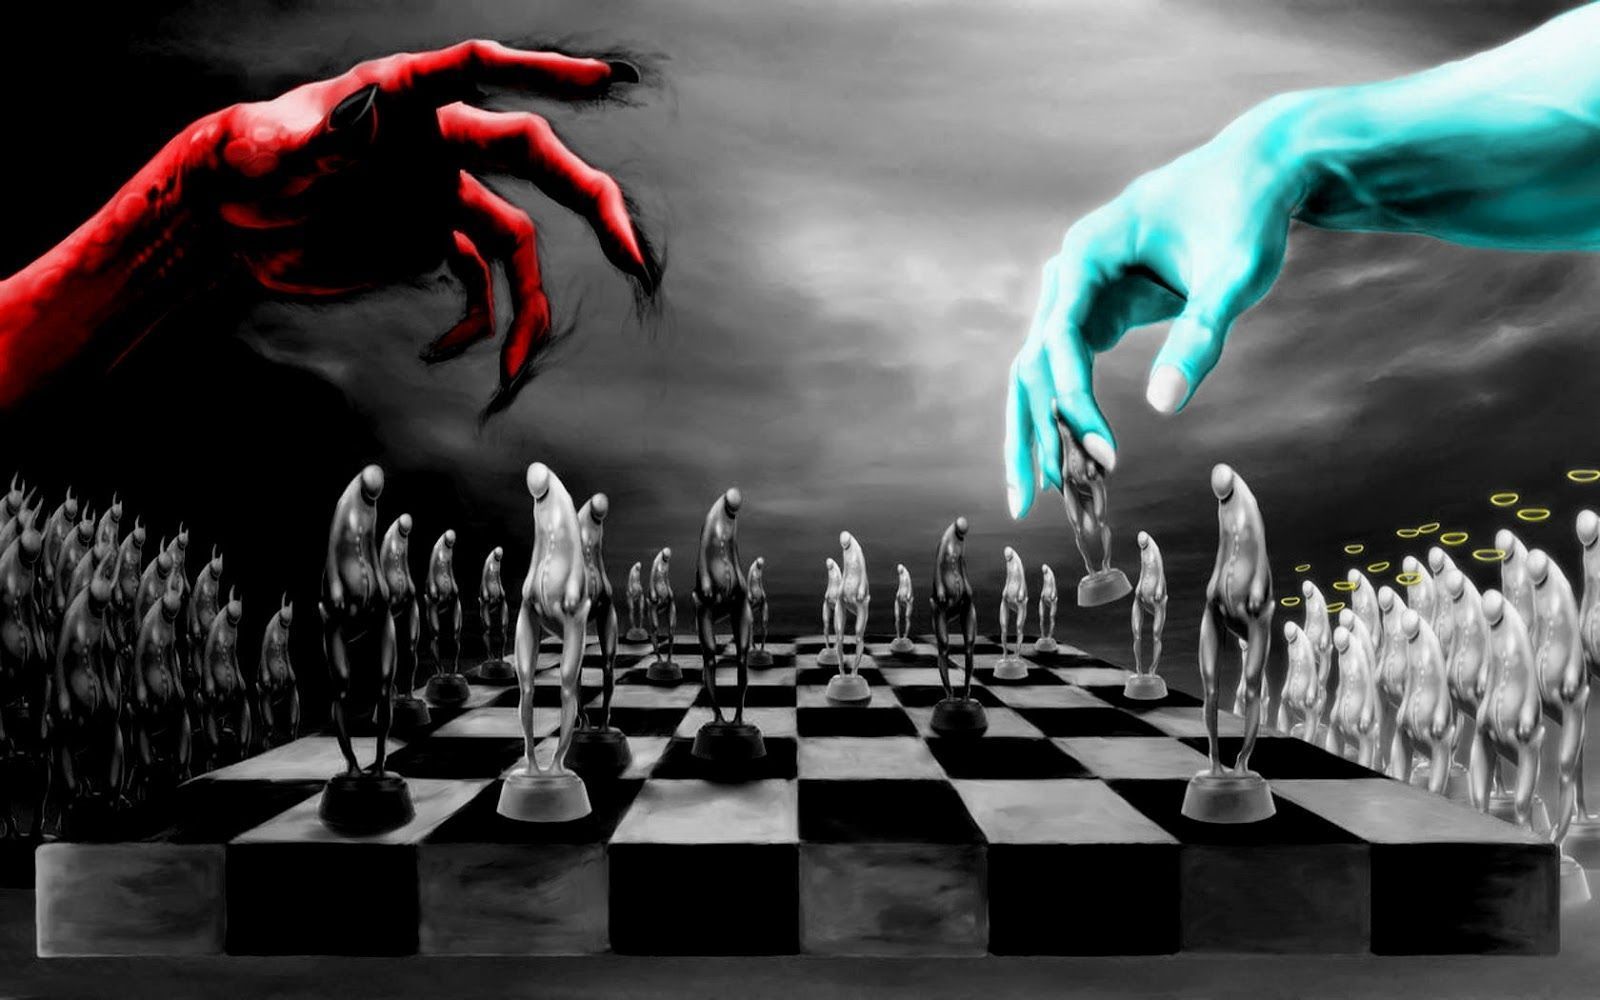 HD wallpapers - Chess wallpapers | Living Arts